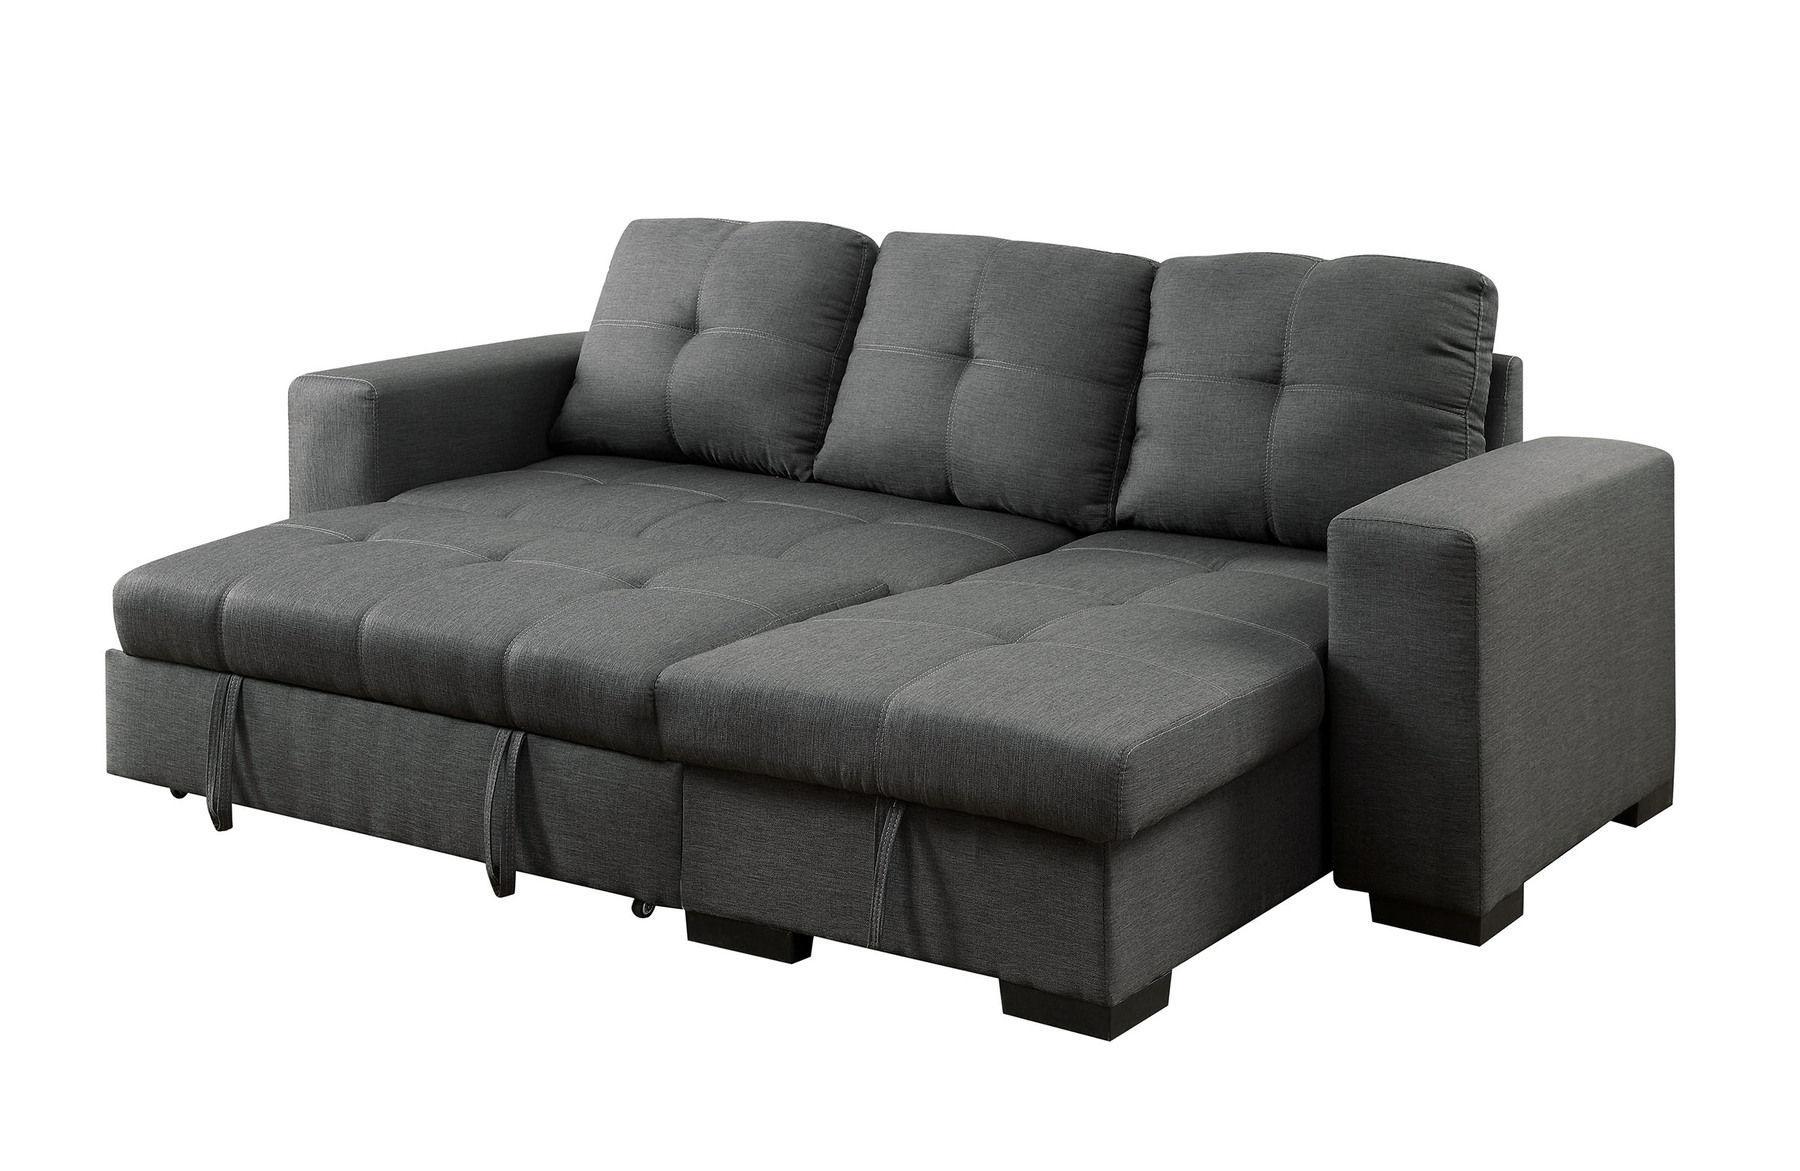 Transitional Sectional Sofa DENTON CM6149GY CM6149GY in Gray 